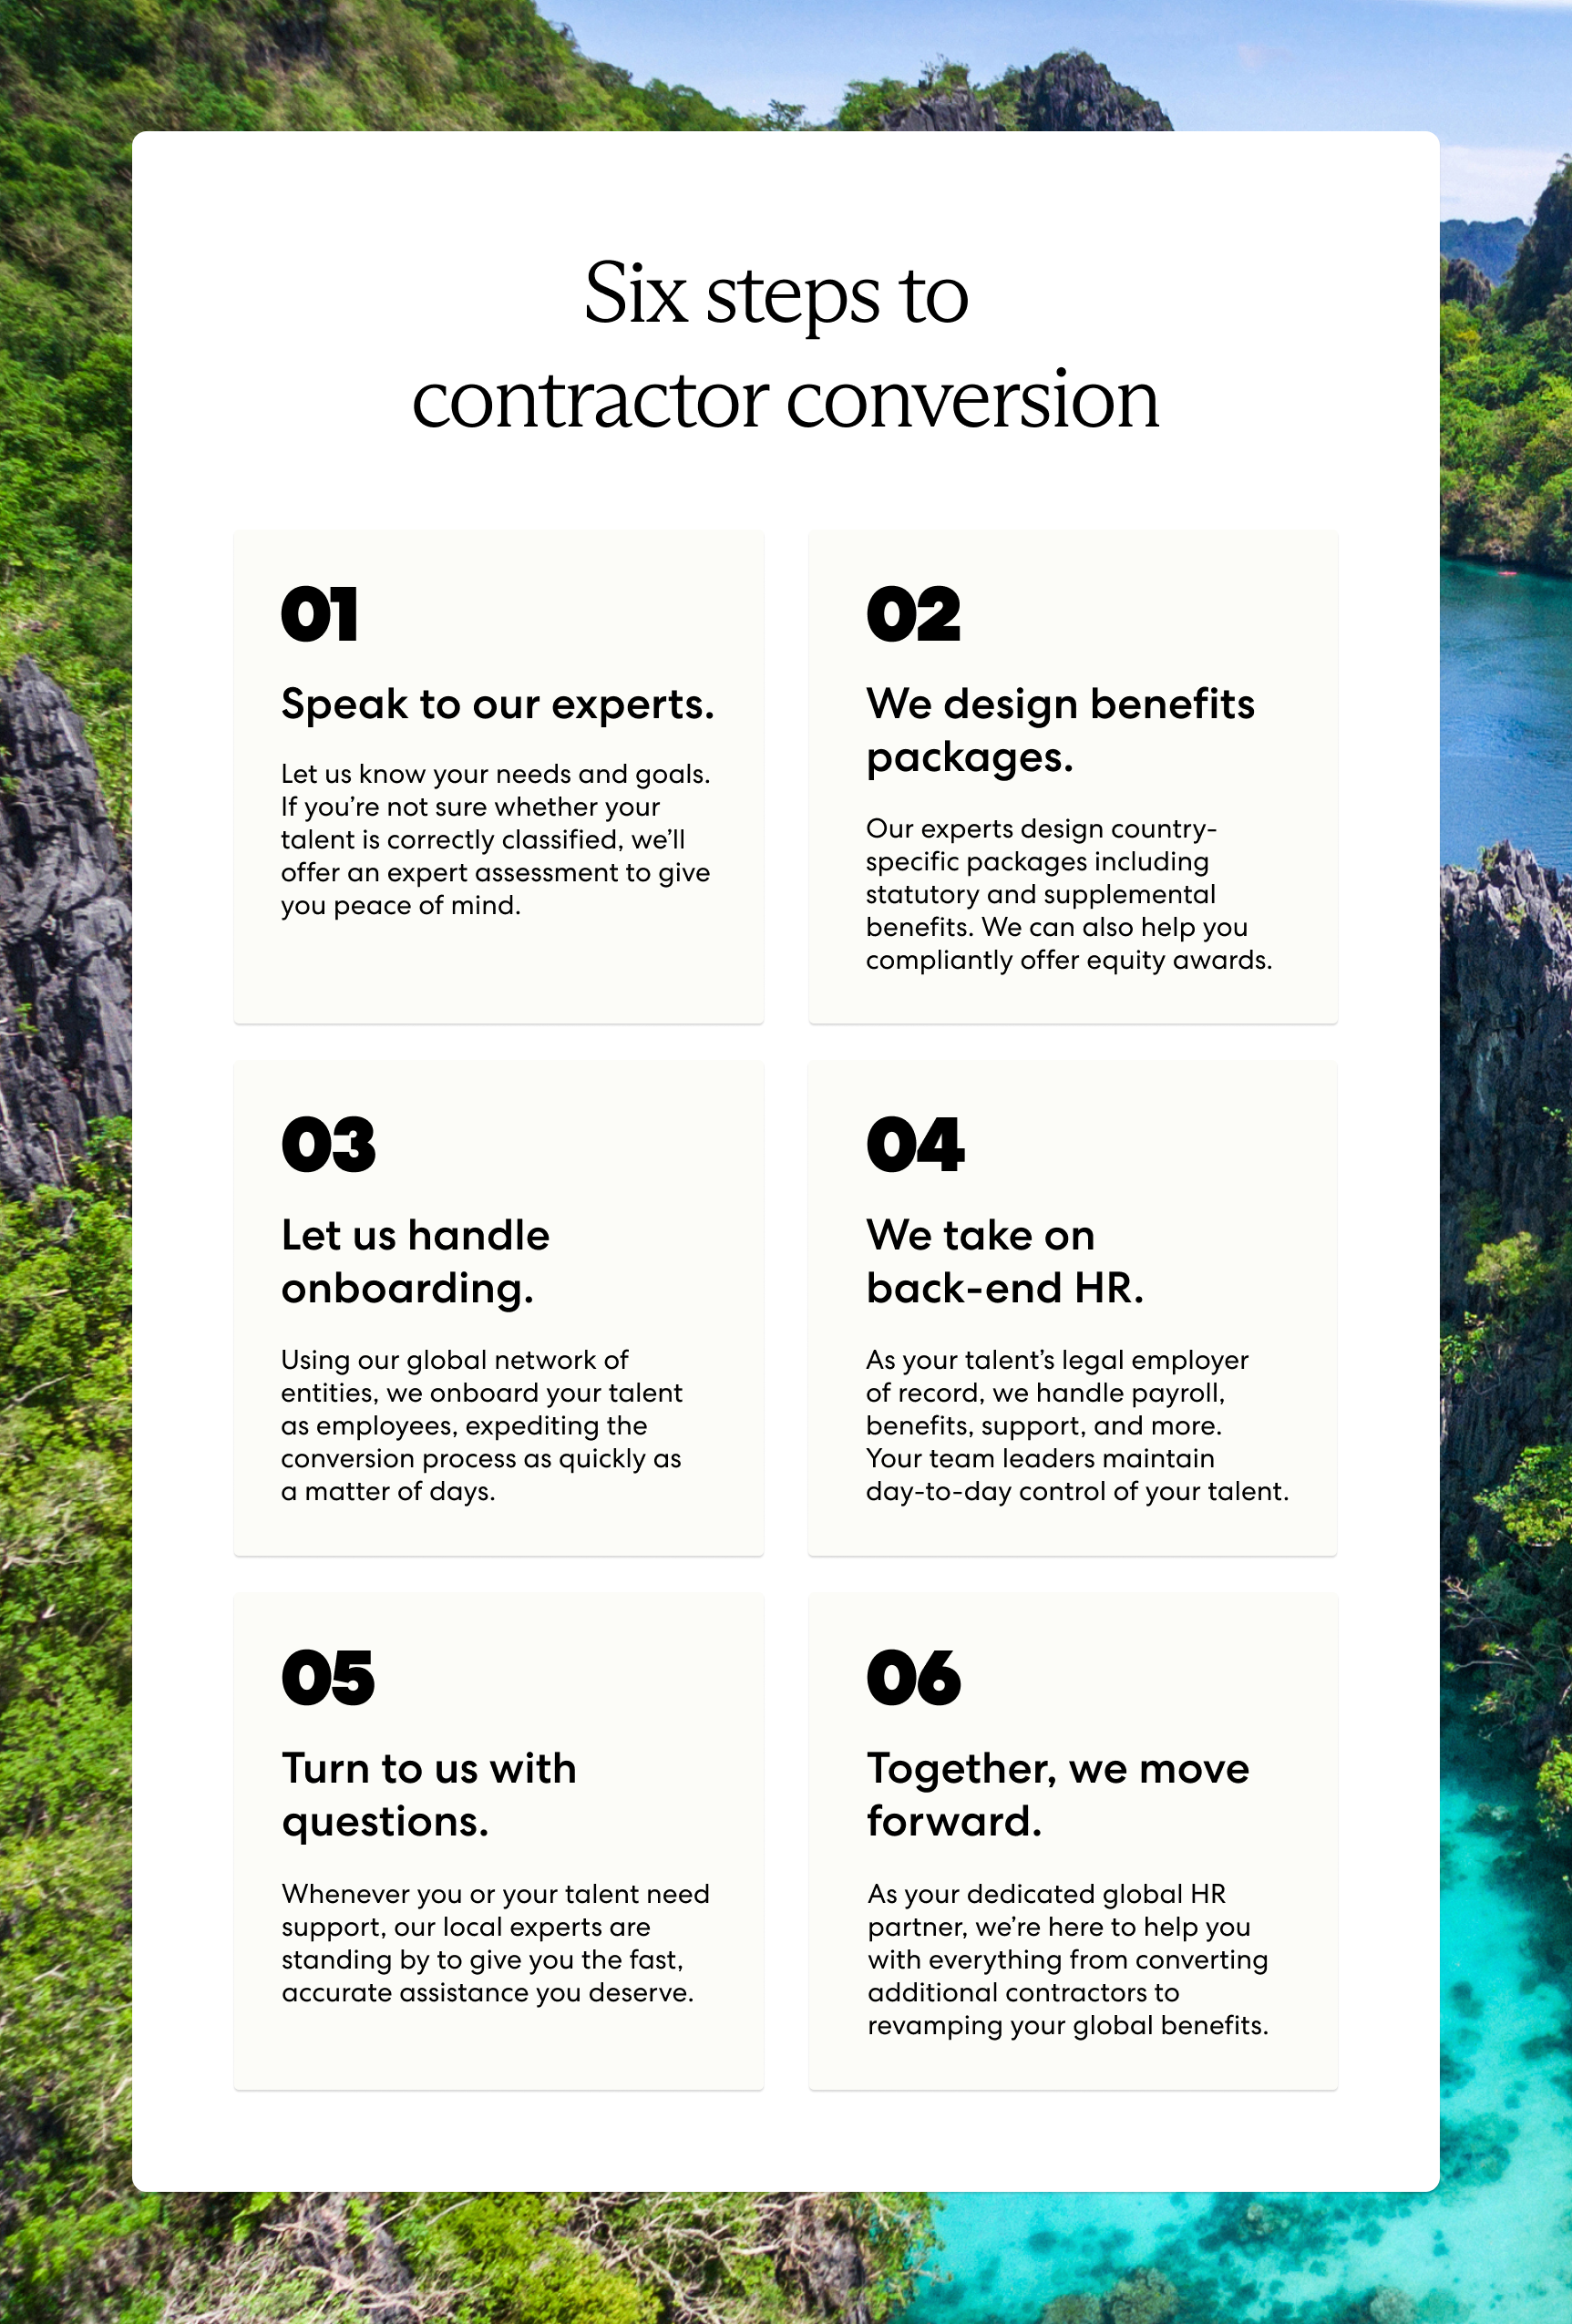 Velocity Global handles all steps of contractor conversion, from classification to onboarding, benefits, payroll, and ongoing support